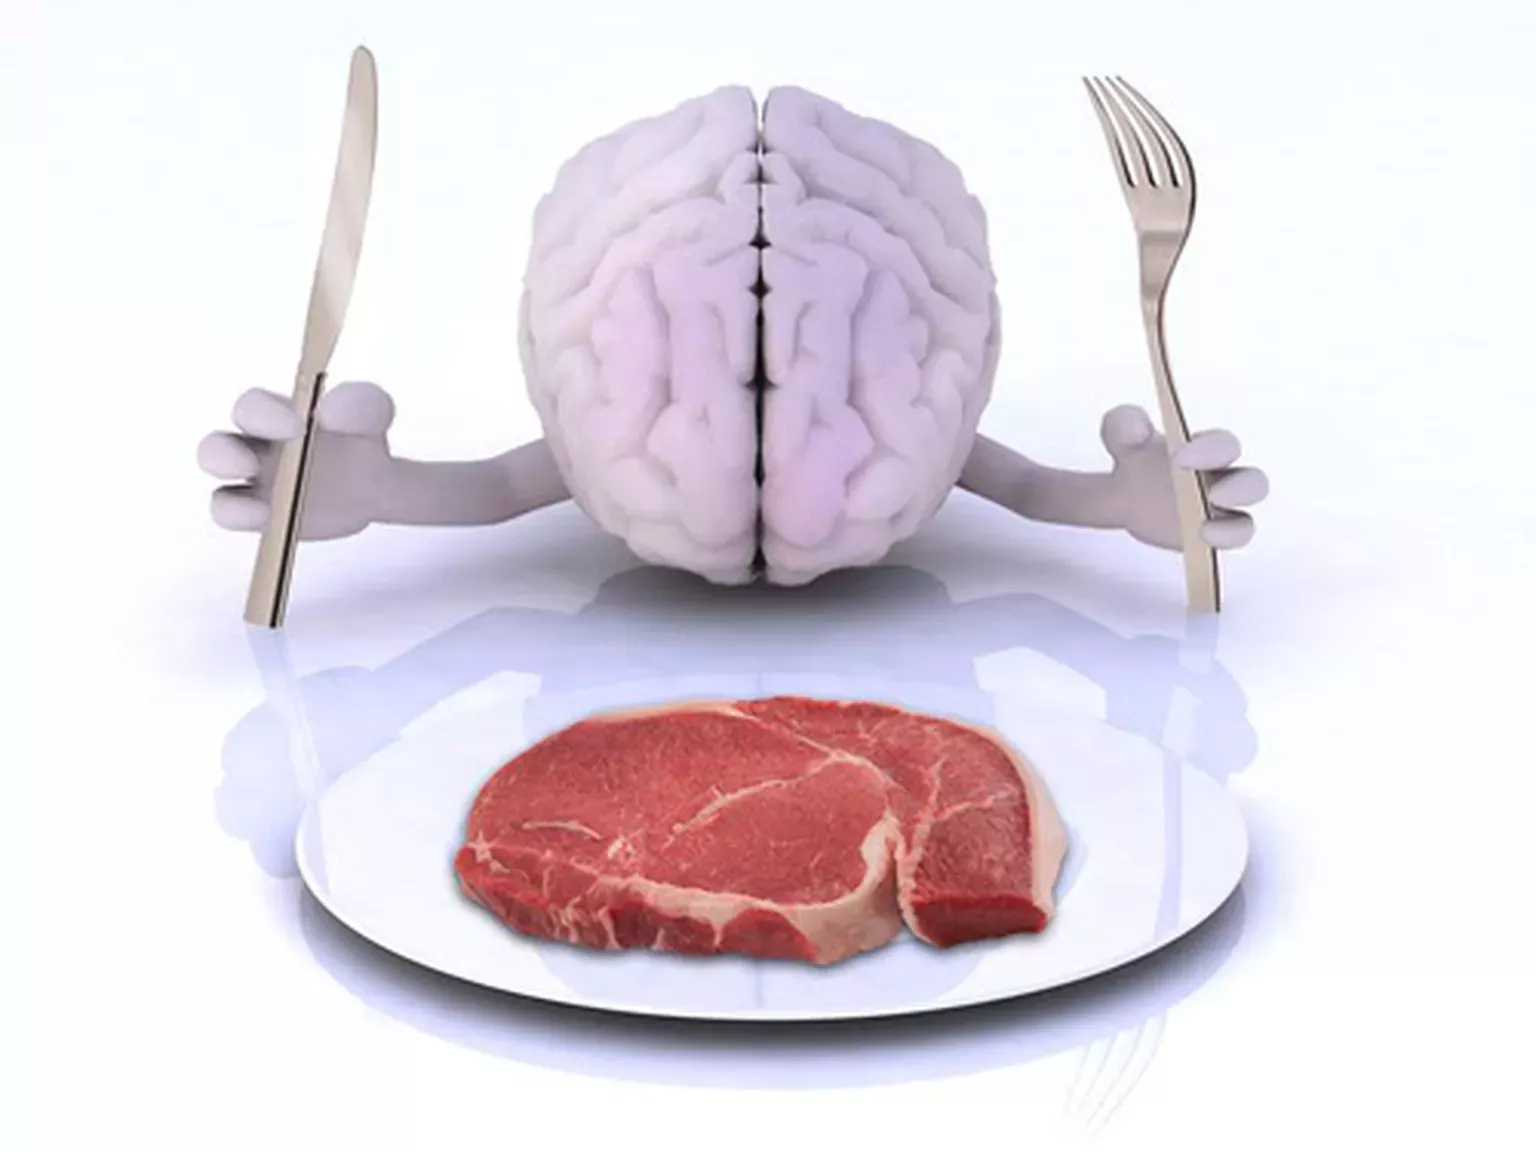 Surprising Facts About The Psychology Of Eating